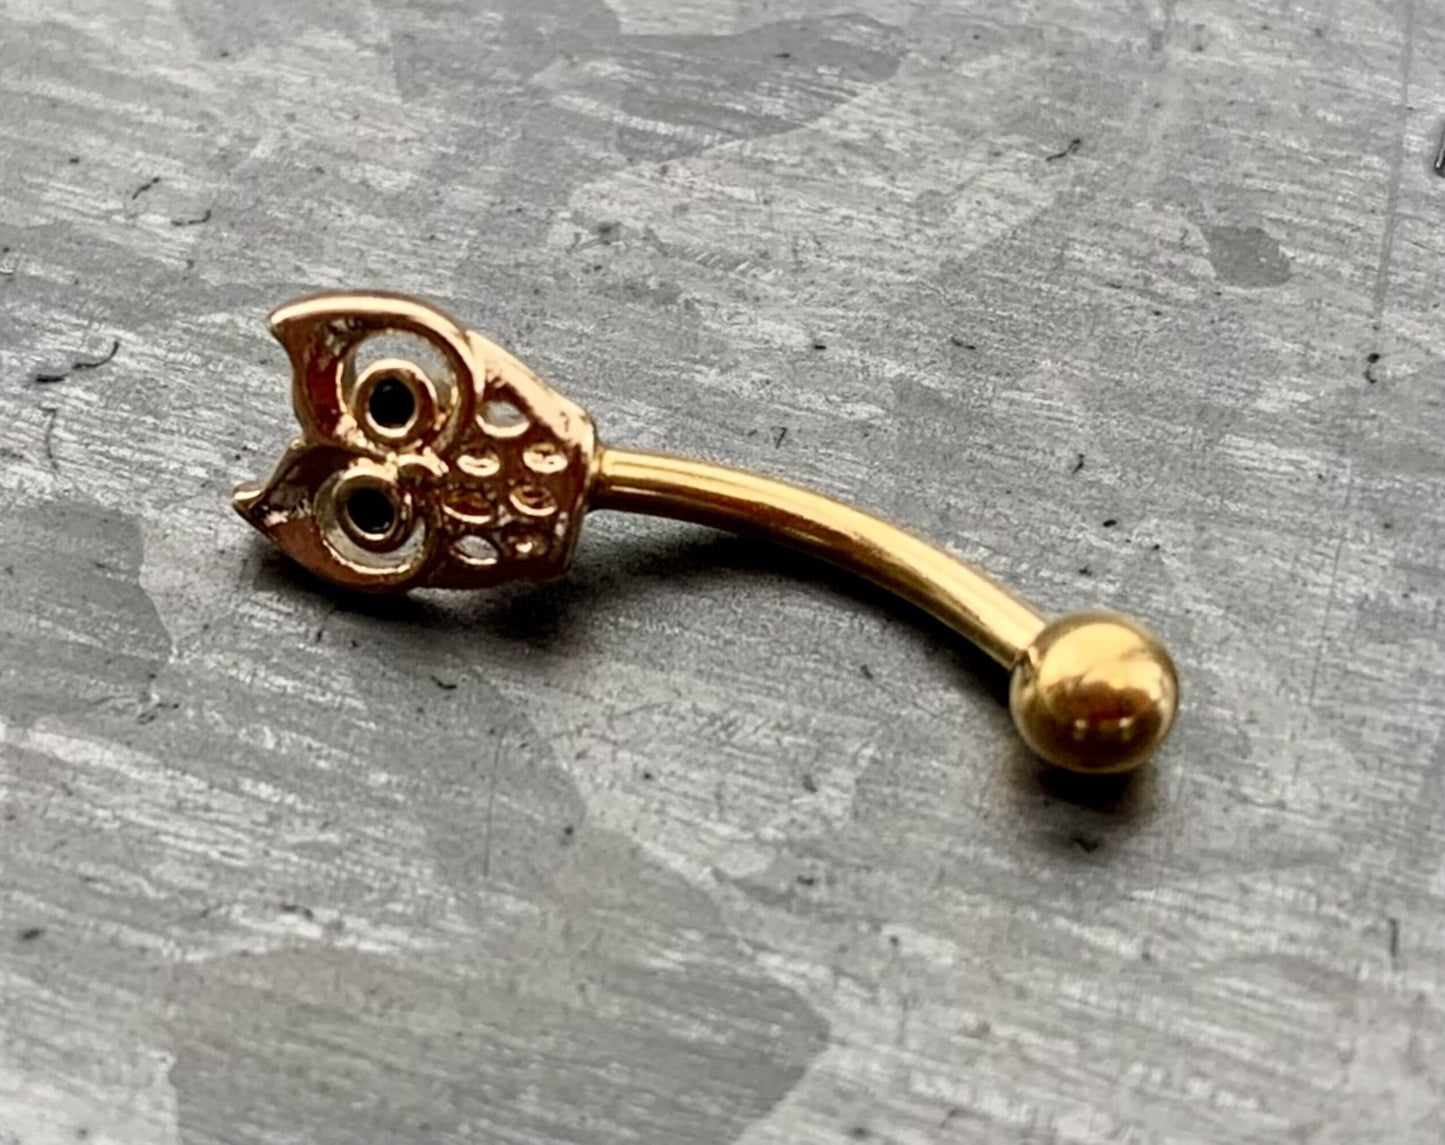 1 Owl Surgical Steel Eyebrow Ring with Curved Barbell - 16g (1.2mm), length 5/16" (8mm), Ball 3mm - Silver, Gold or Rose Gold available!